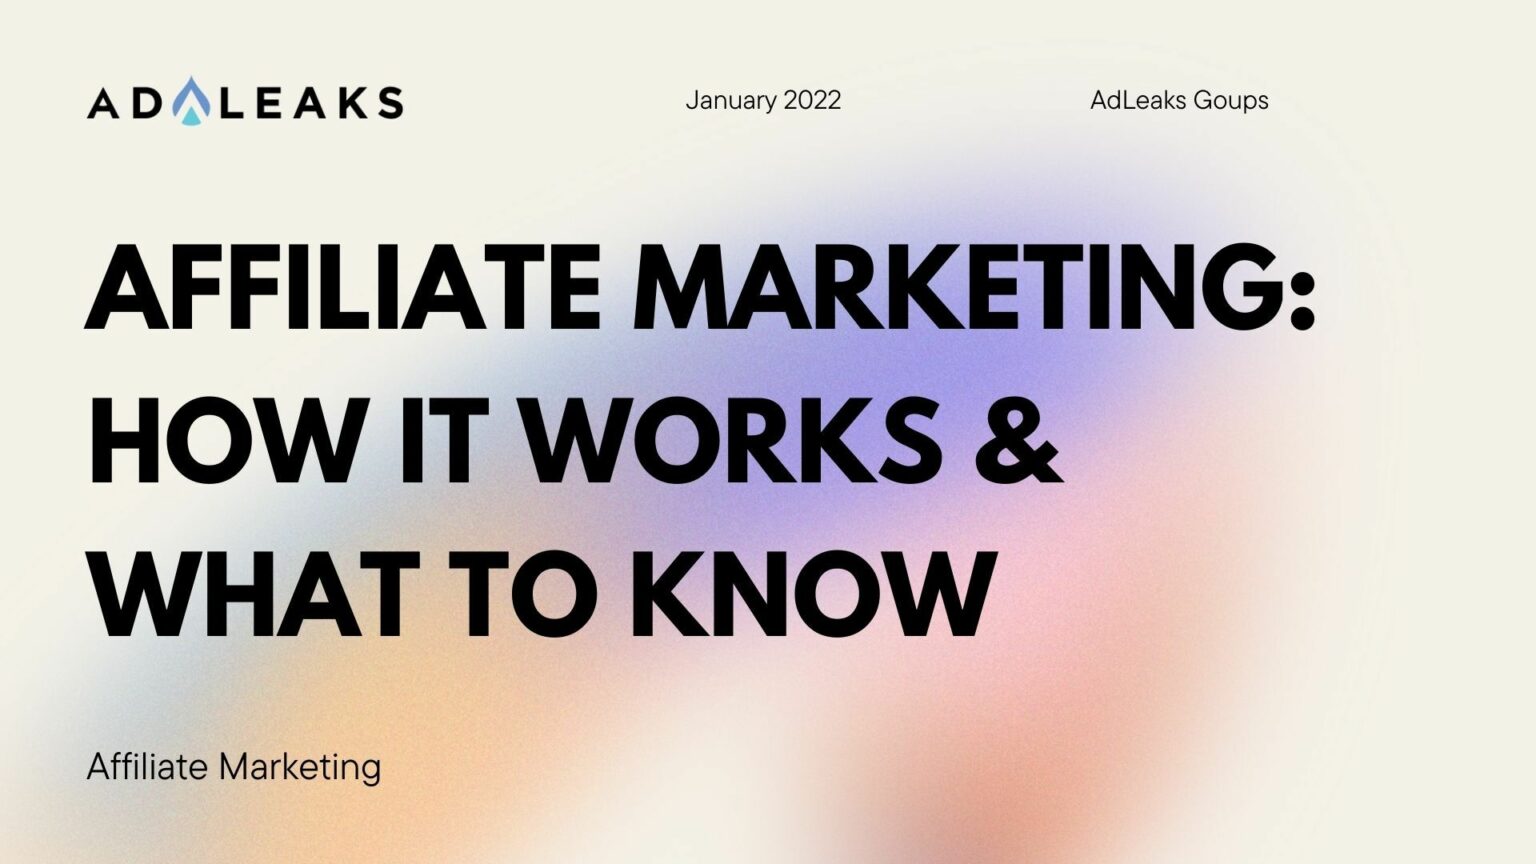 Affiliate Marketing: How it Works & What to Know